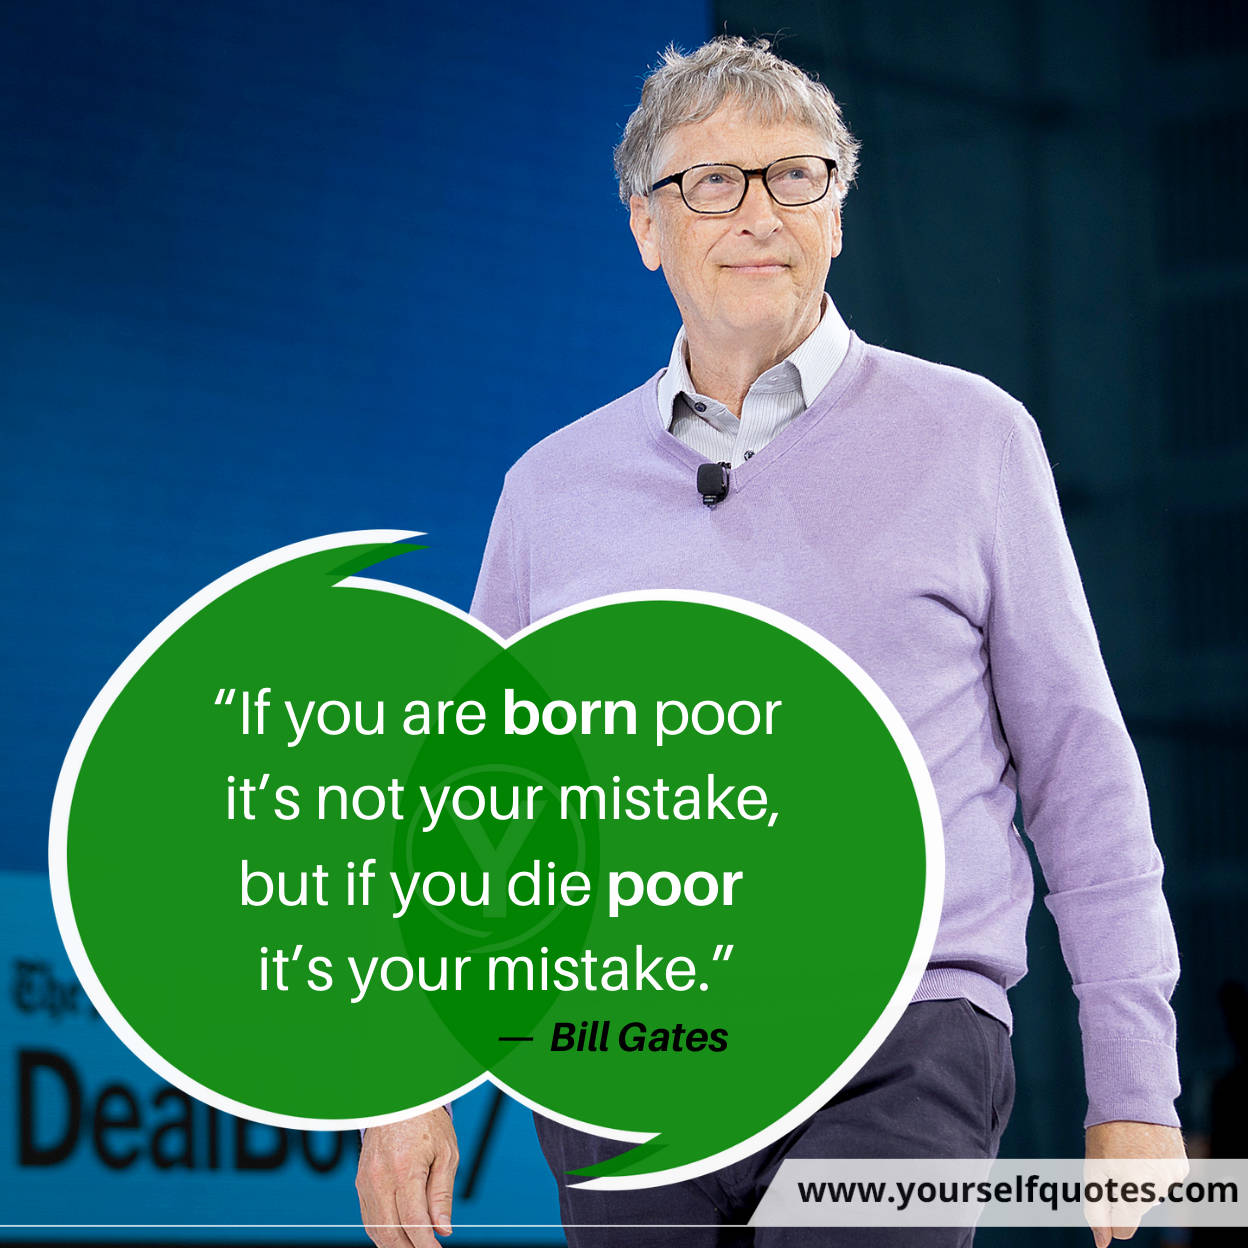 Best Bill Gates Quotes Images